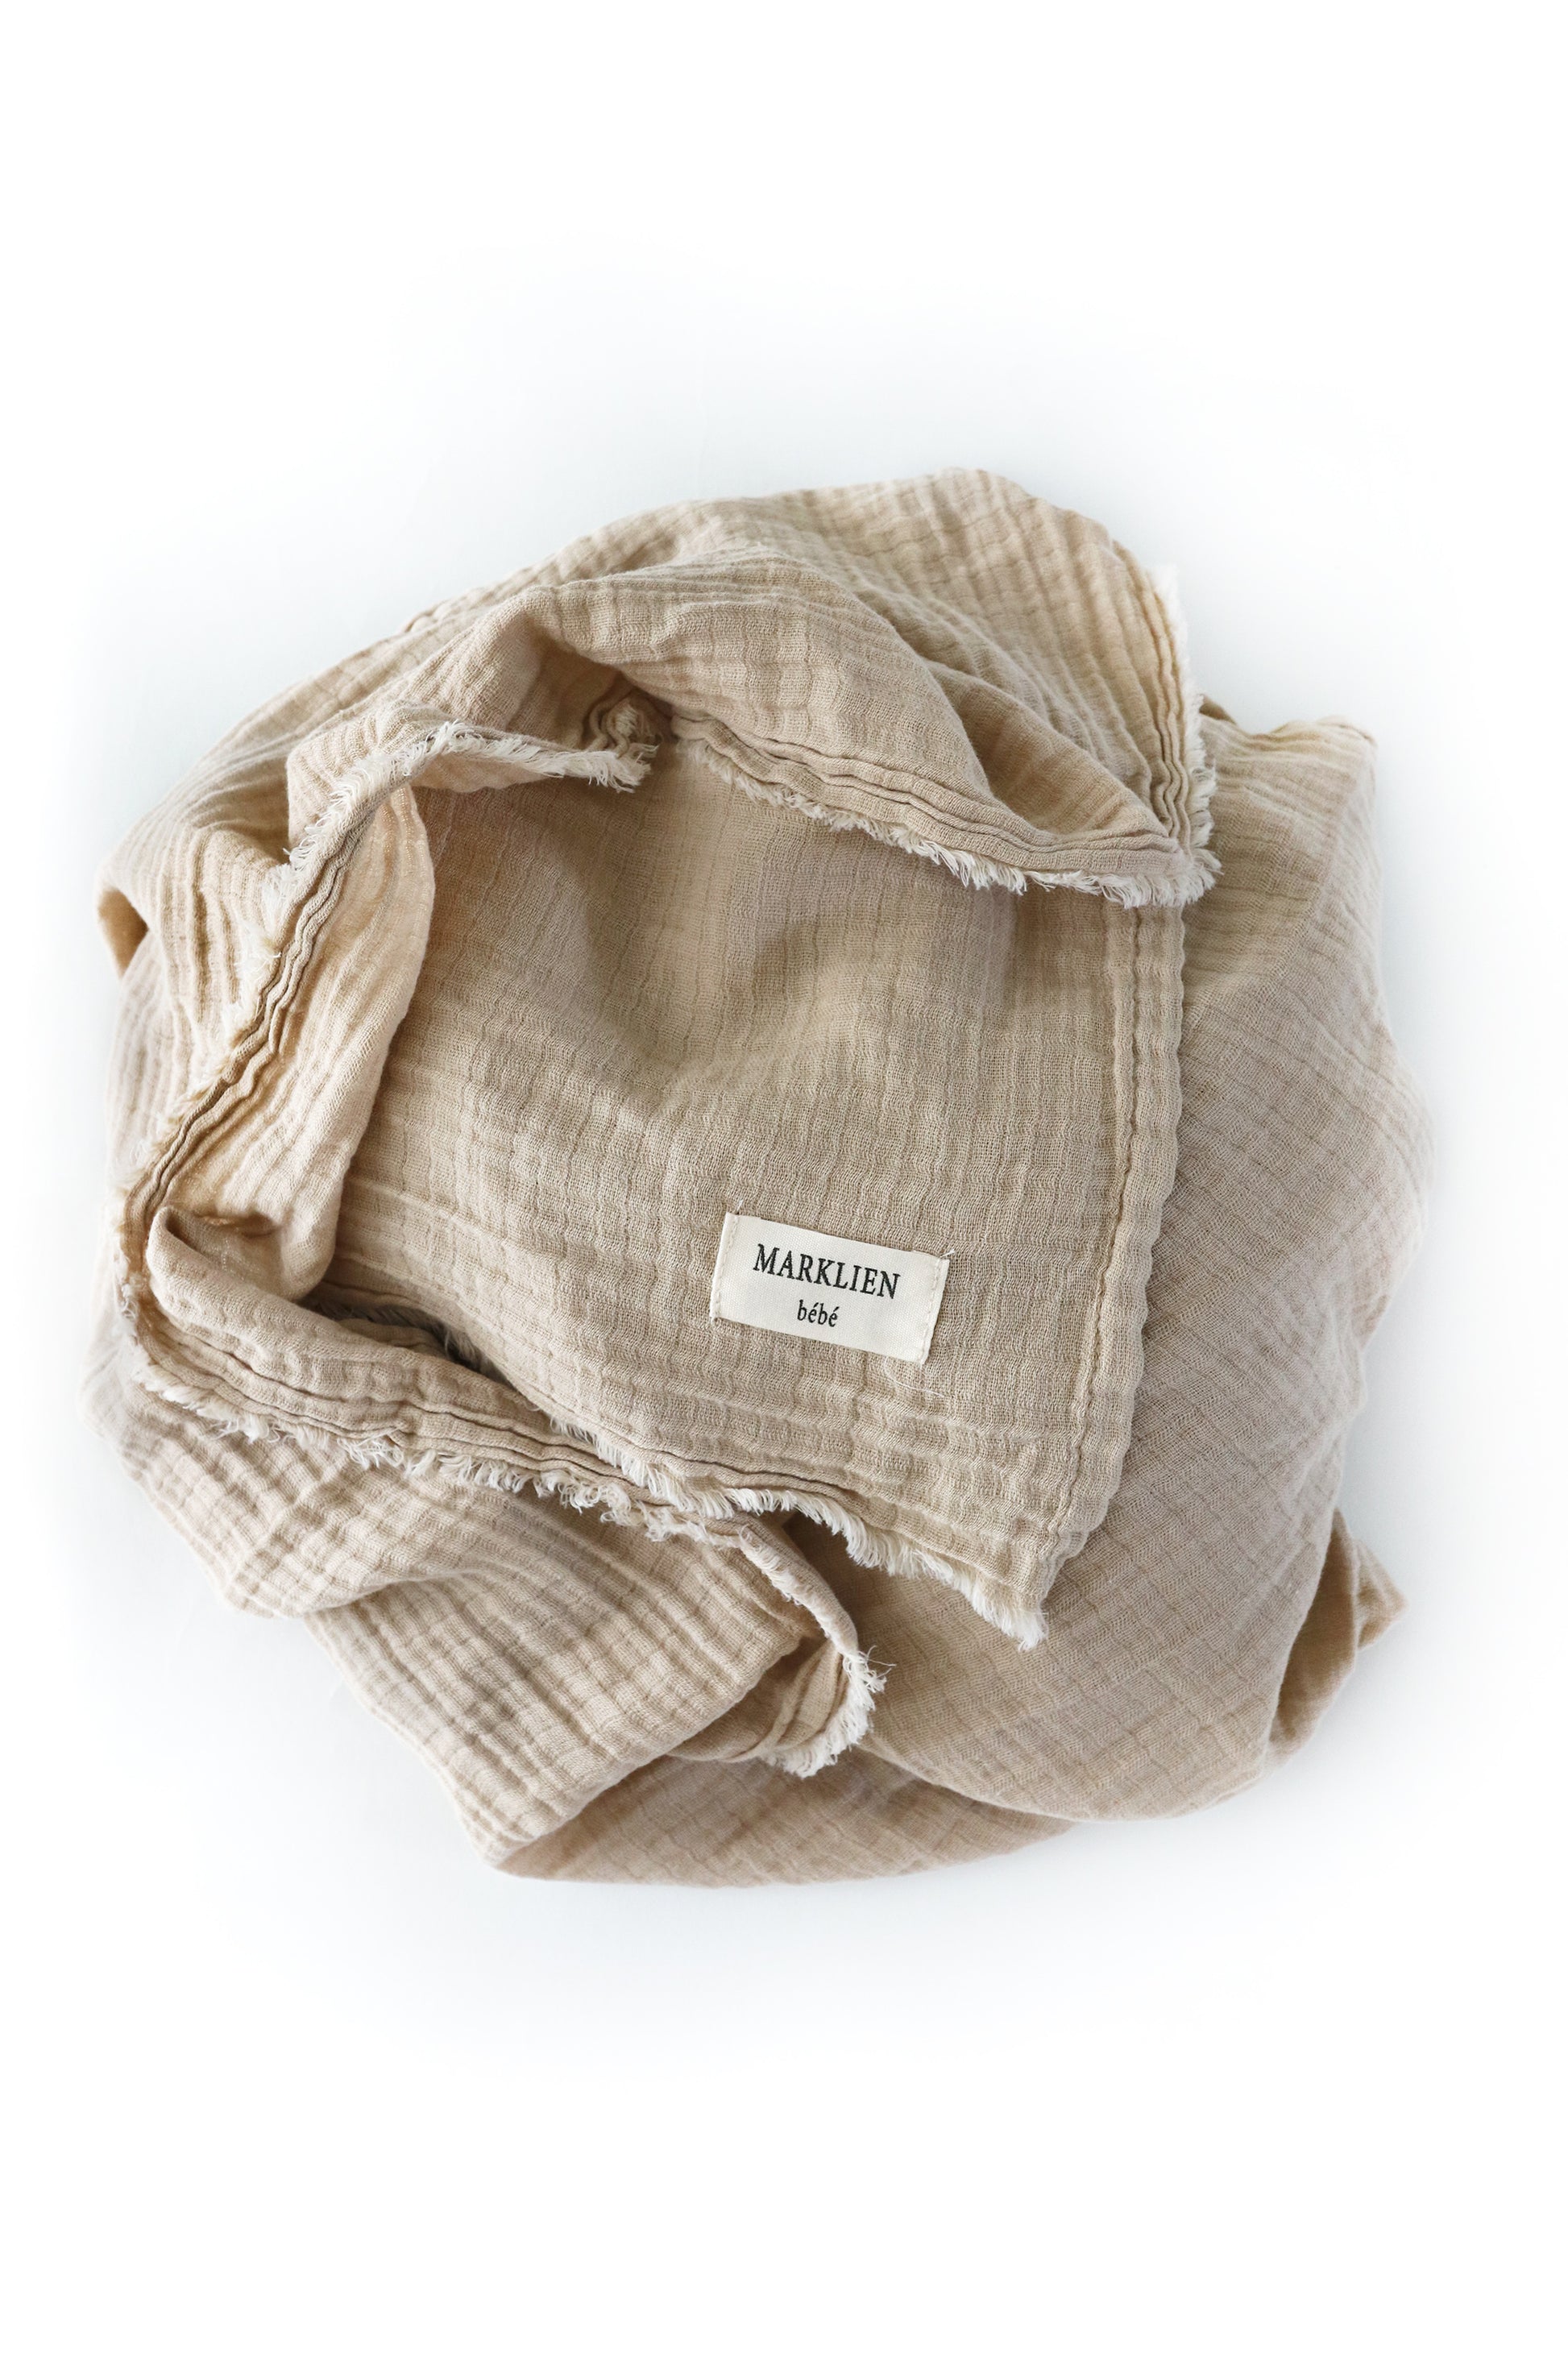 2 Layer Muslin Swaddle  100% muslin cotton gender neutral earthy tone large baby swaddle.  Perfect size for swaddle, blanket, sun shield, nursing cover and more! 